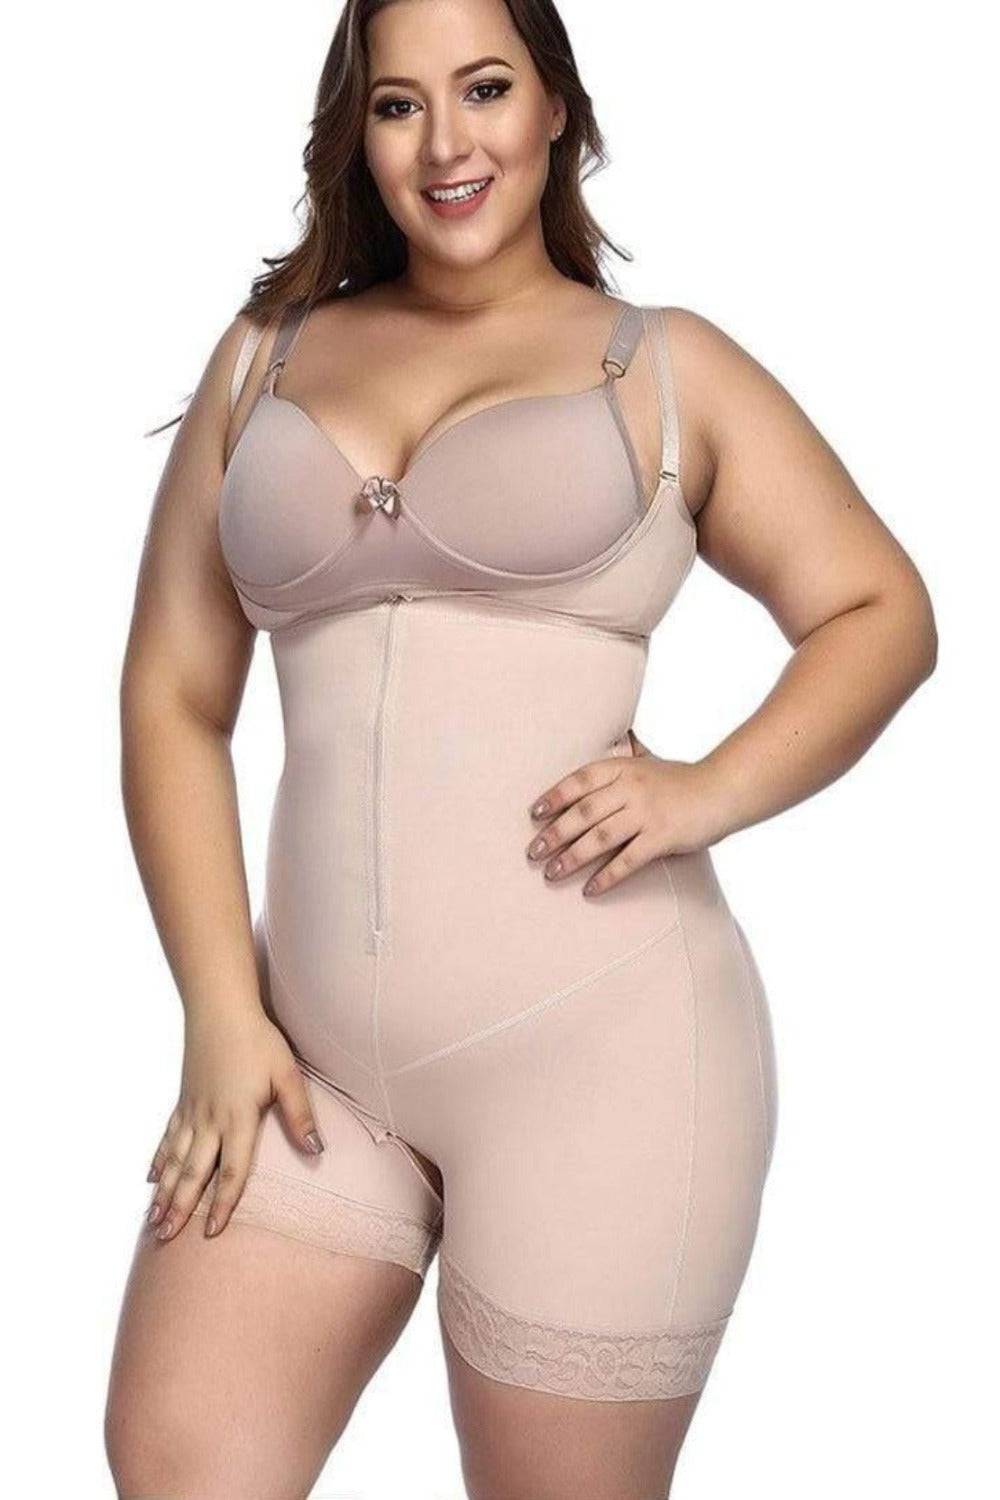 Same style different size. The full body tummy control comes in sizes